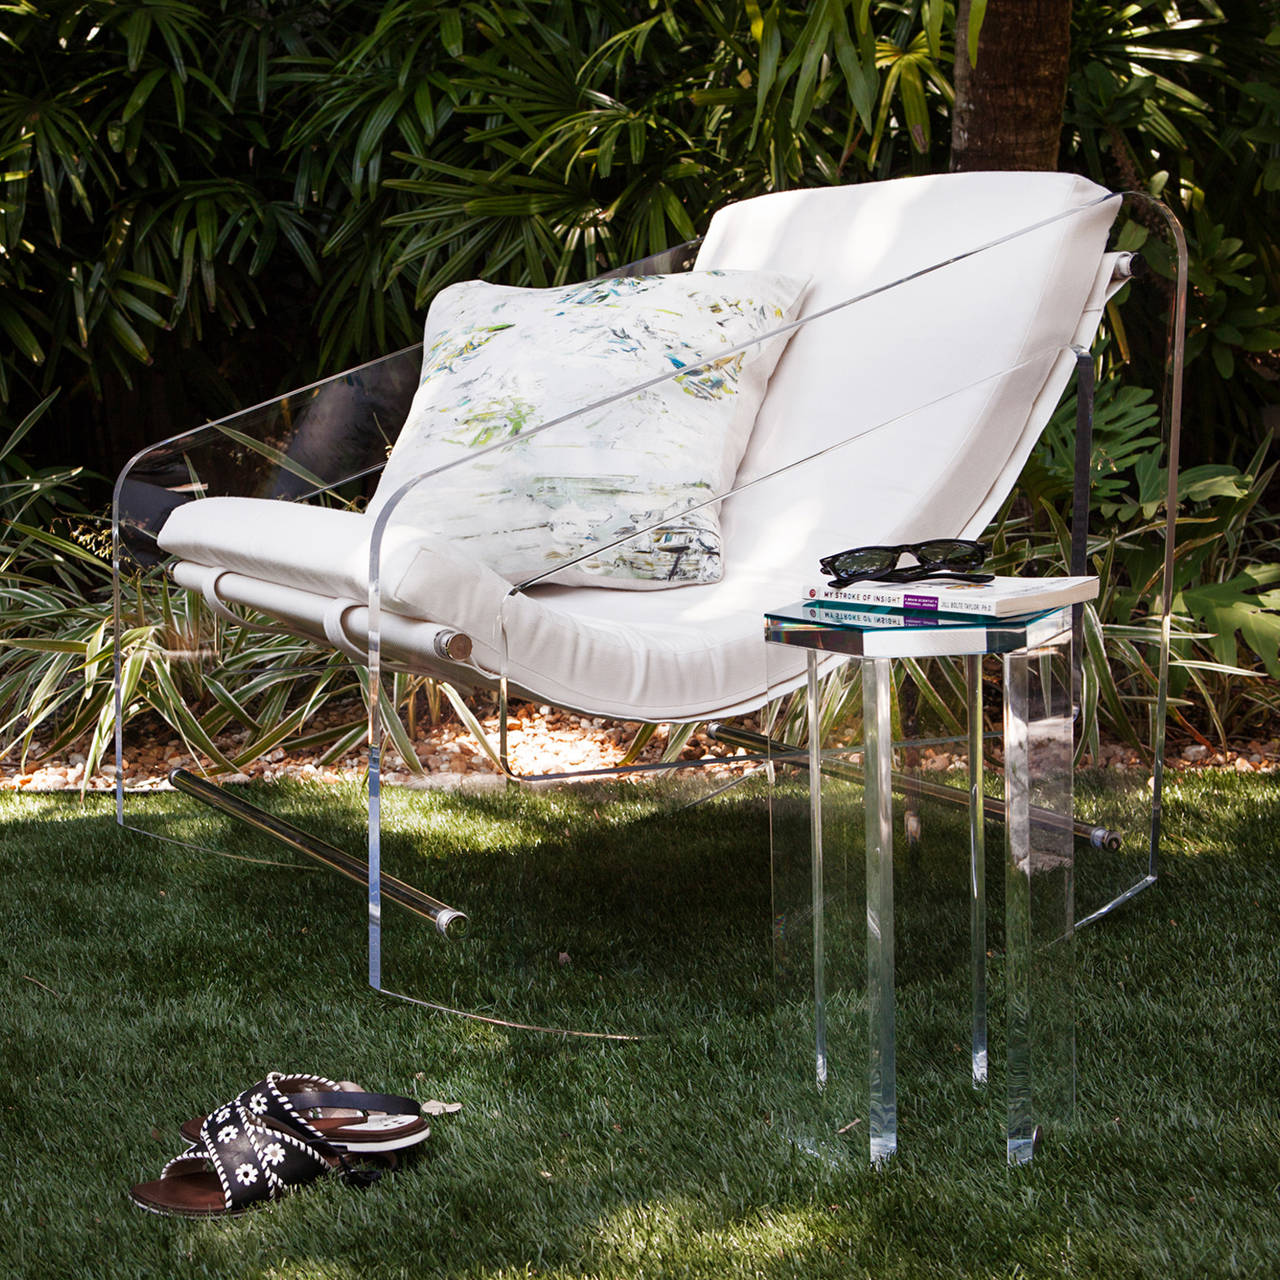 A new take on front porch pastime and relaxation. A polymer mesh sling supports an upholstered cushion that levitates between one inch acrylic panels with wide-curved bases for a floating-effect in both movement and aesthetic. Its uniquely suspended